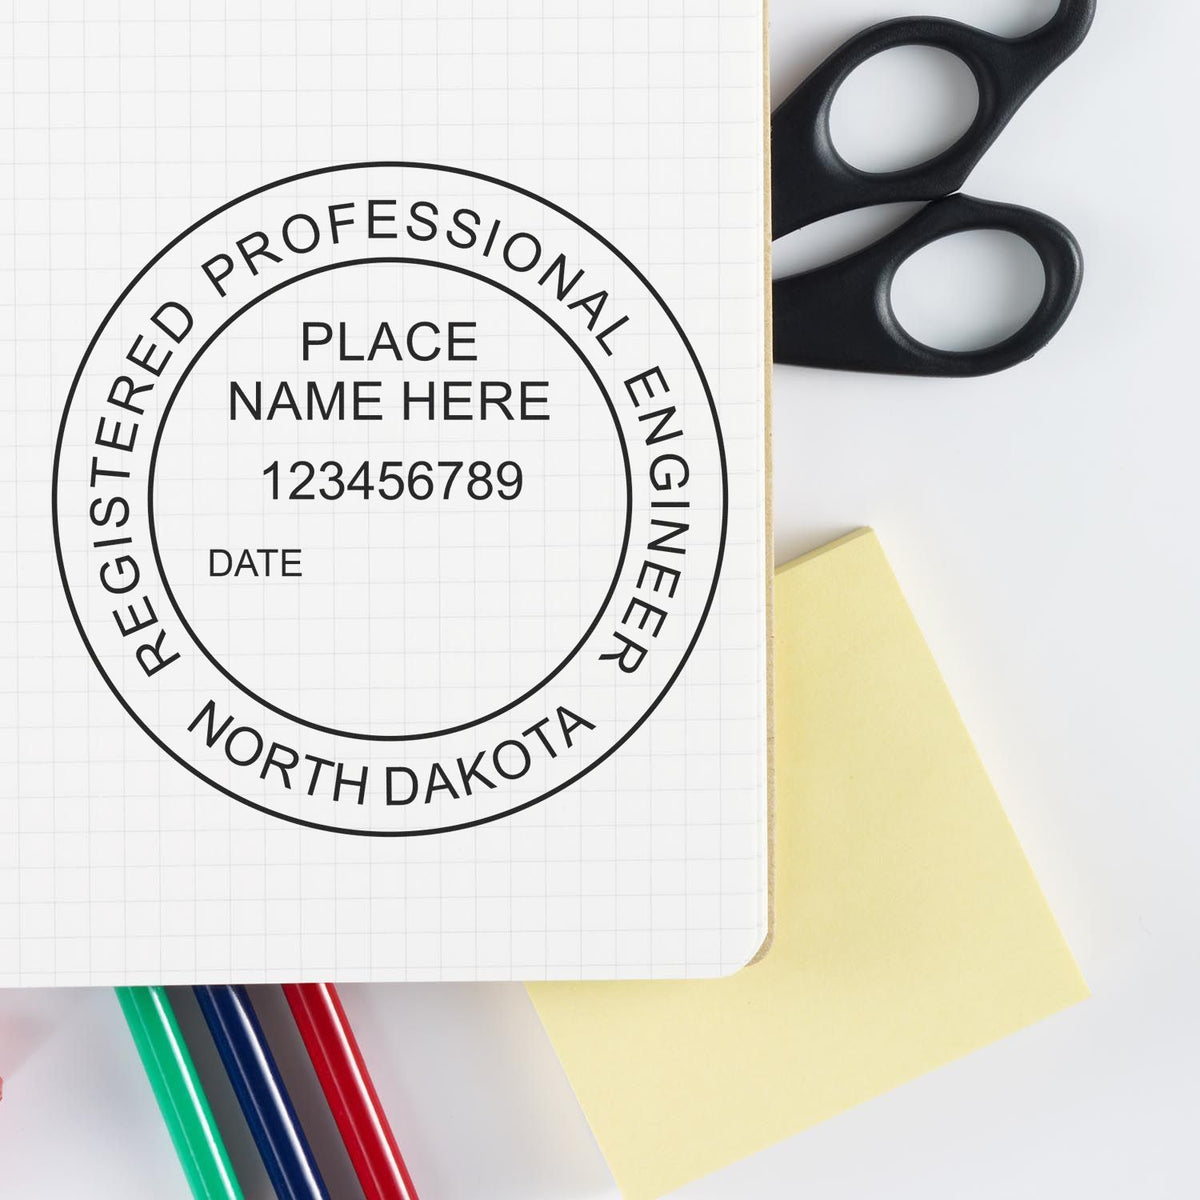 A stamped impression of the Digital North Dakota PE Stamp and Electronic Seal for North Dakota Engineer in this stylish lifestyle photo, setting the tone for a unique and personalized product.